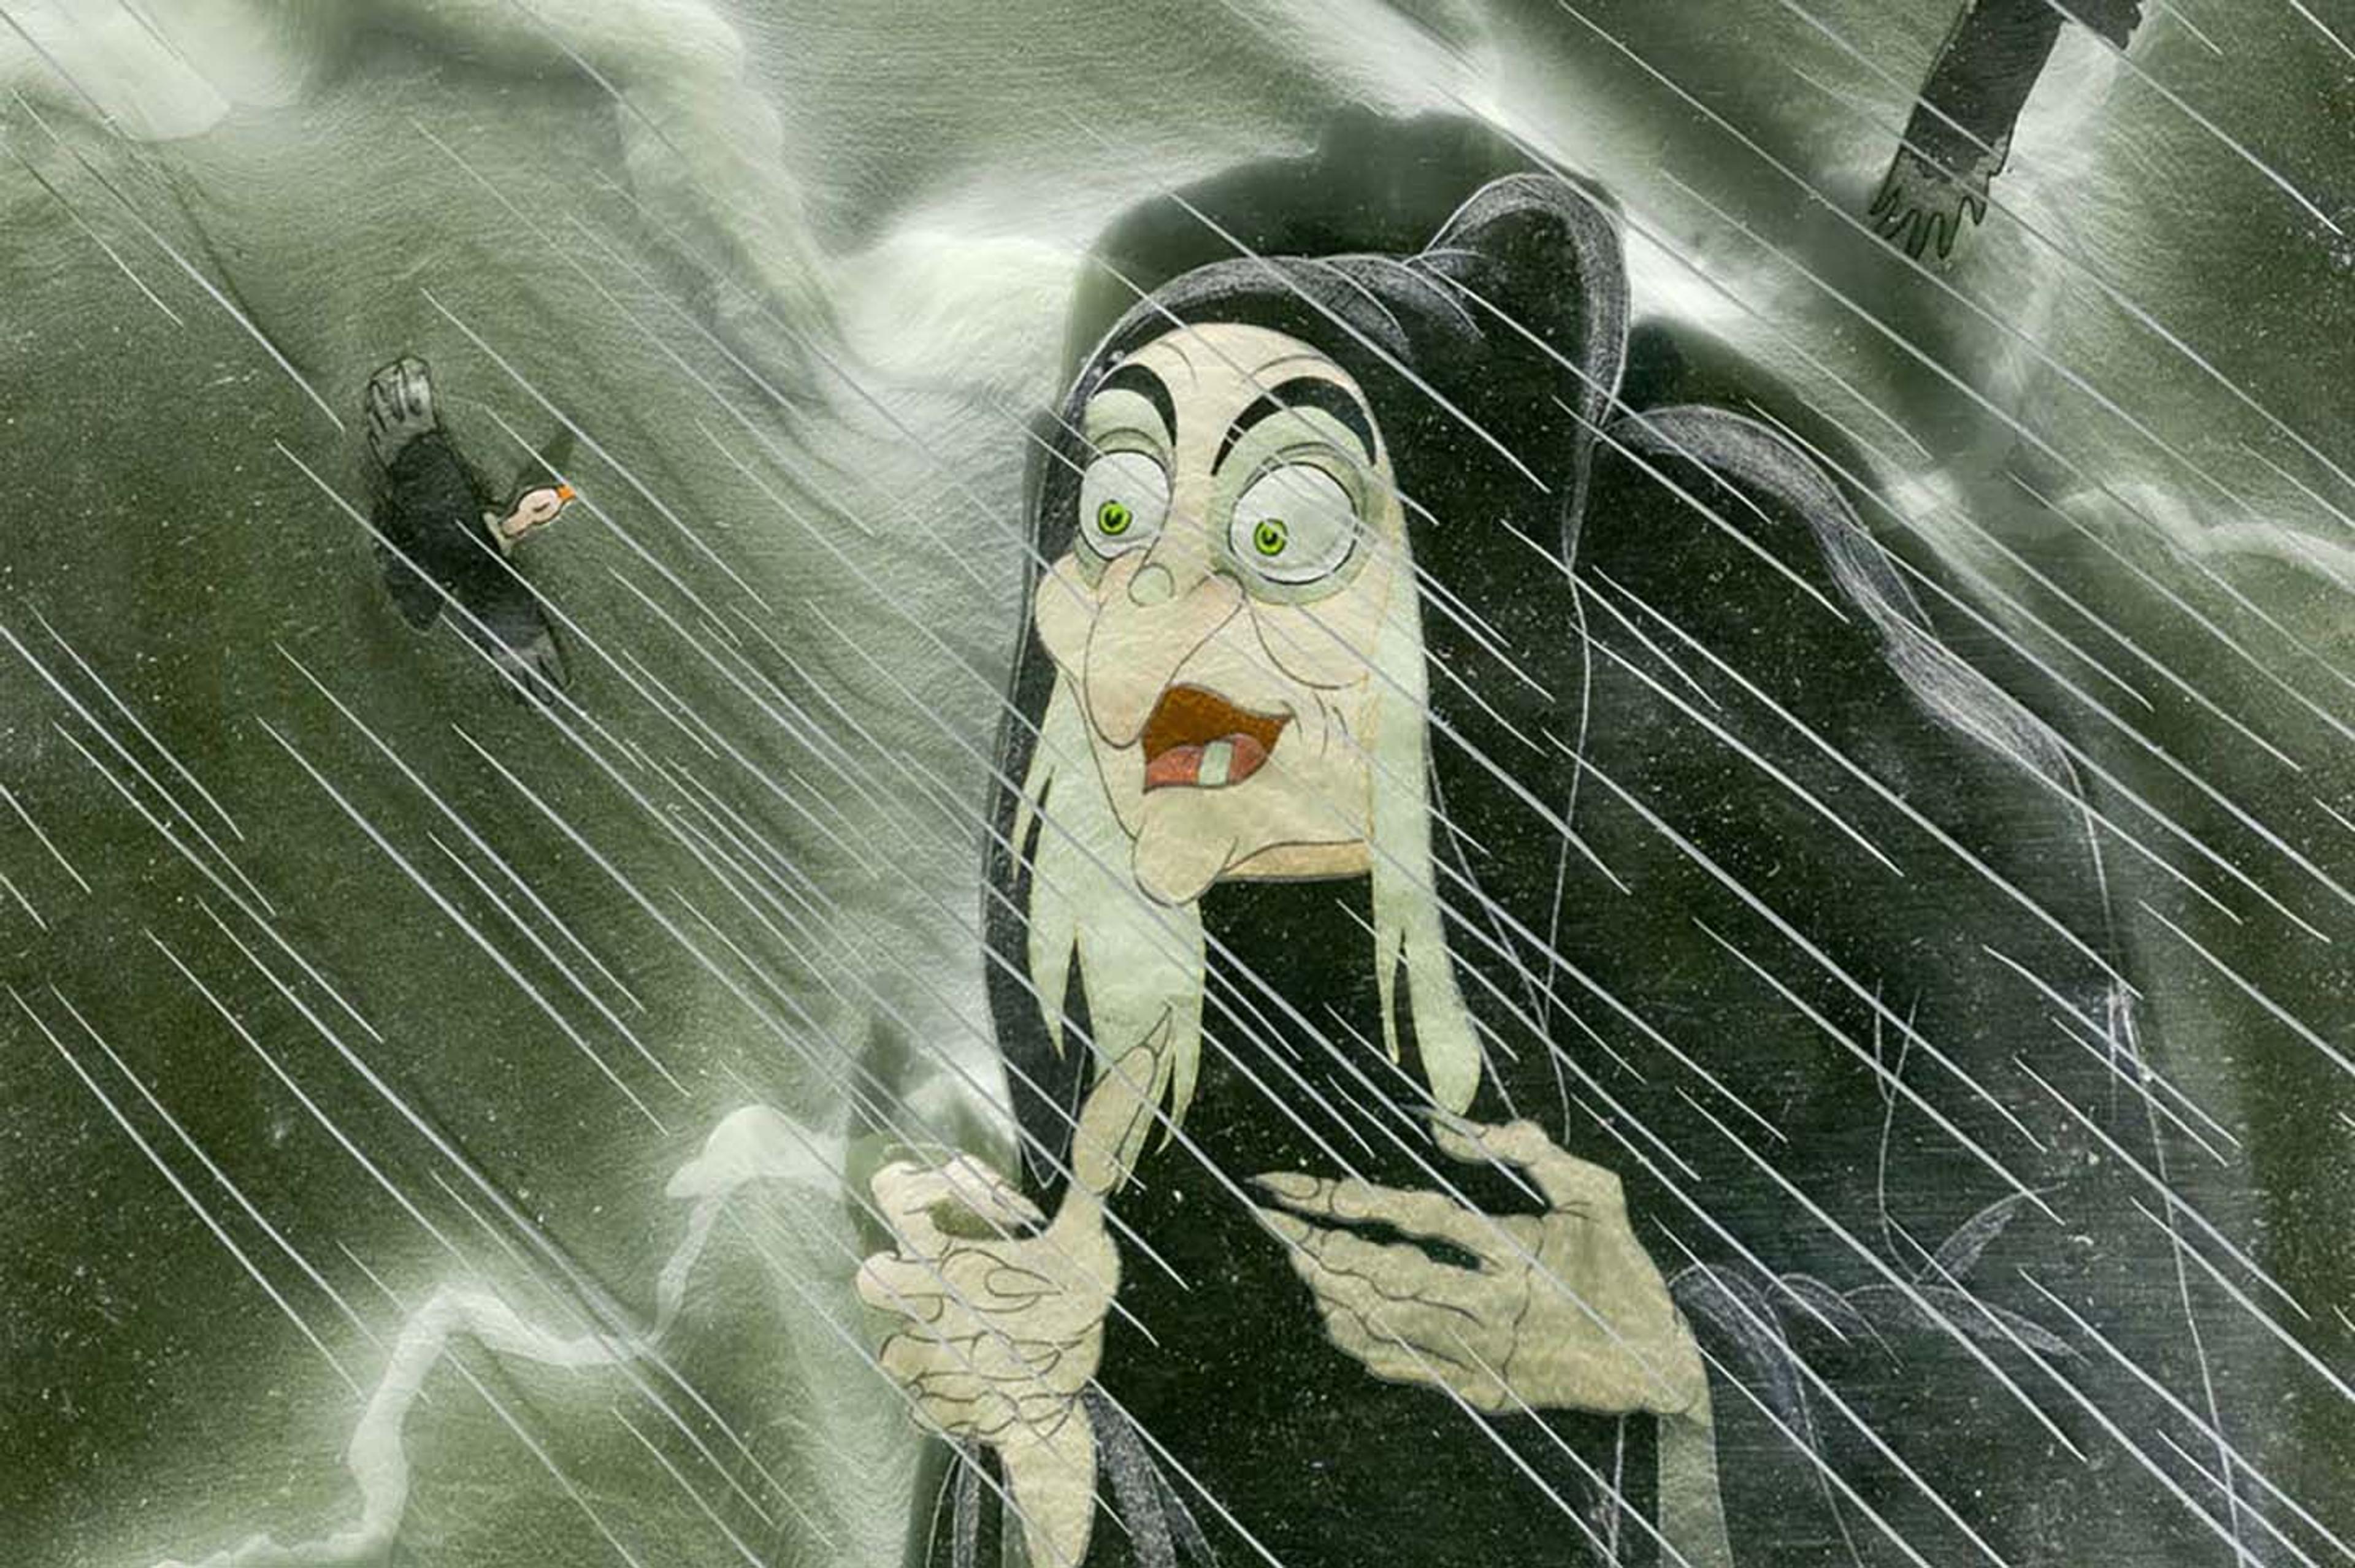 The Evil Witch in the rain with vultures flying overhead from "Snow White."